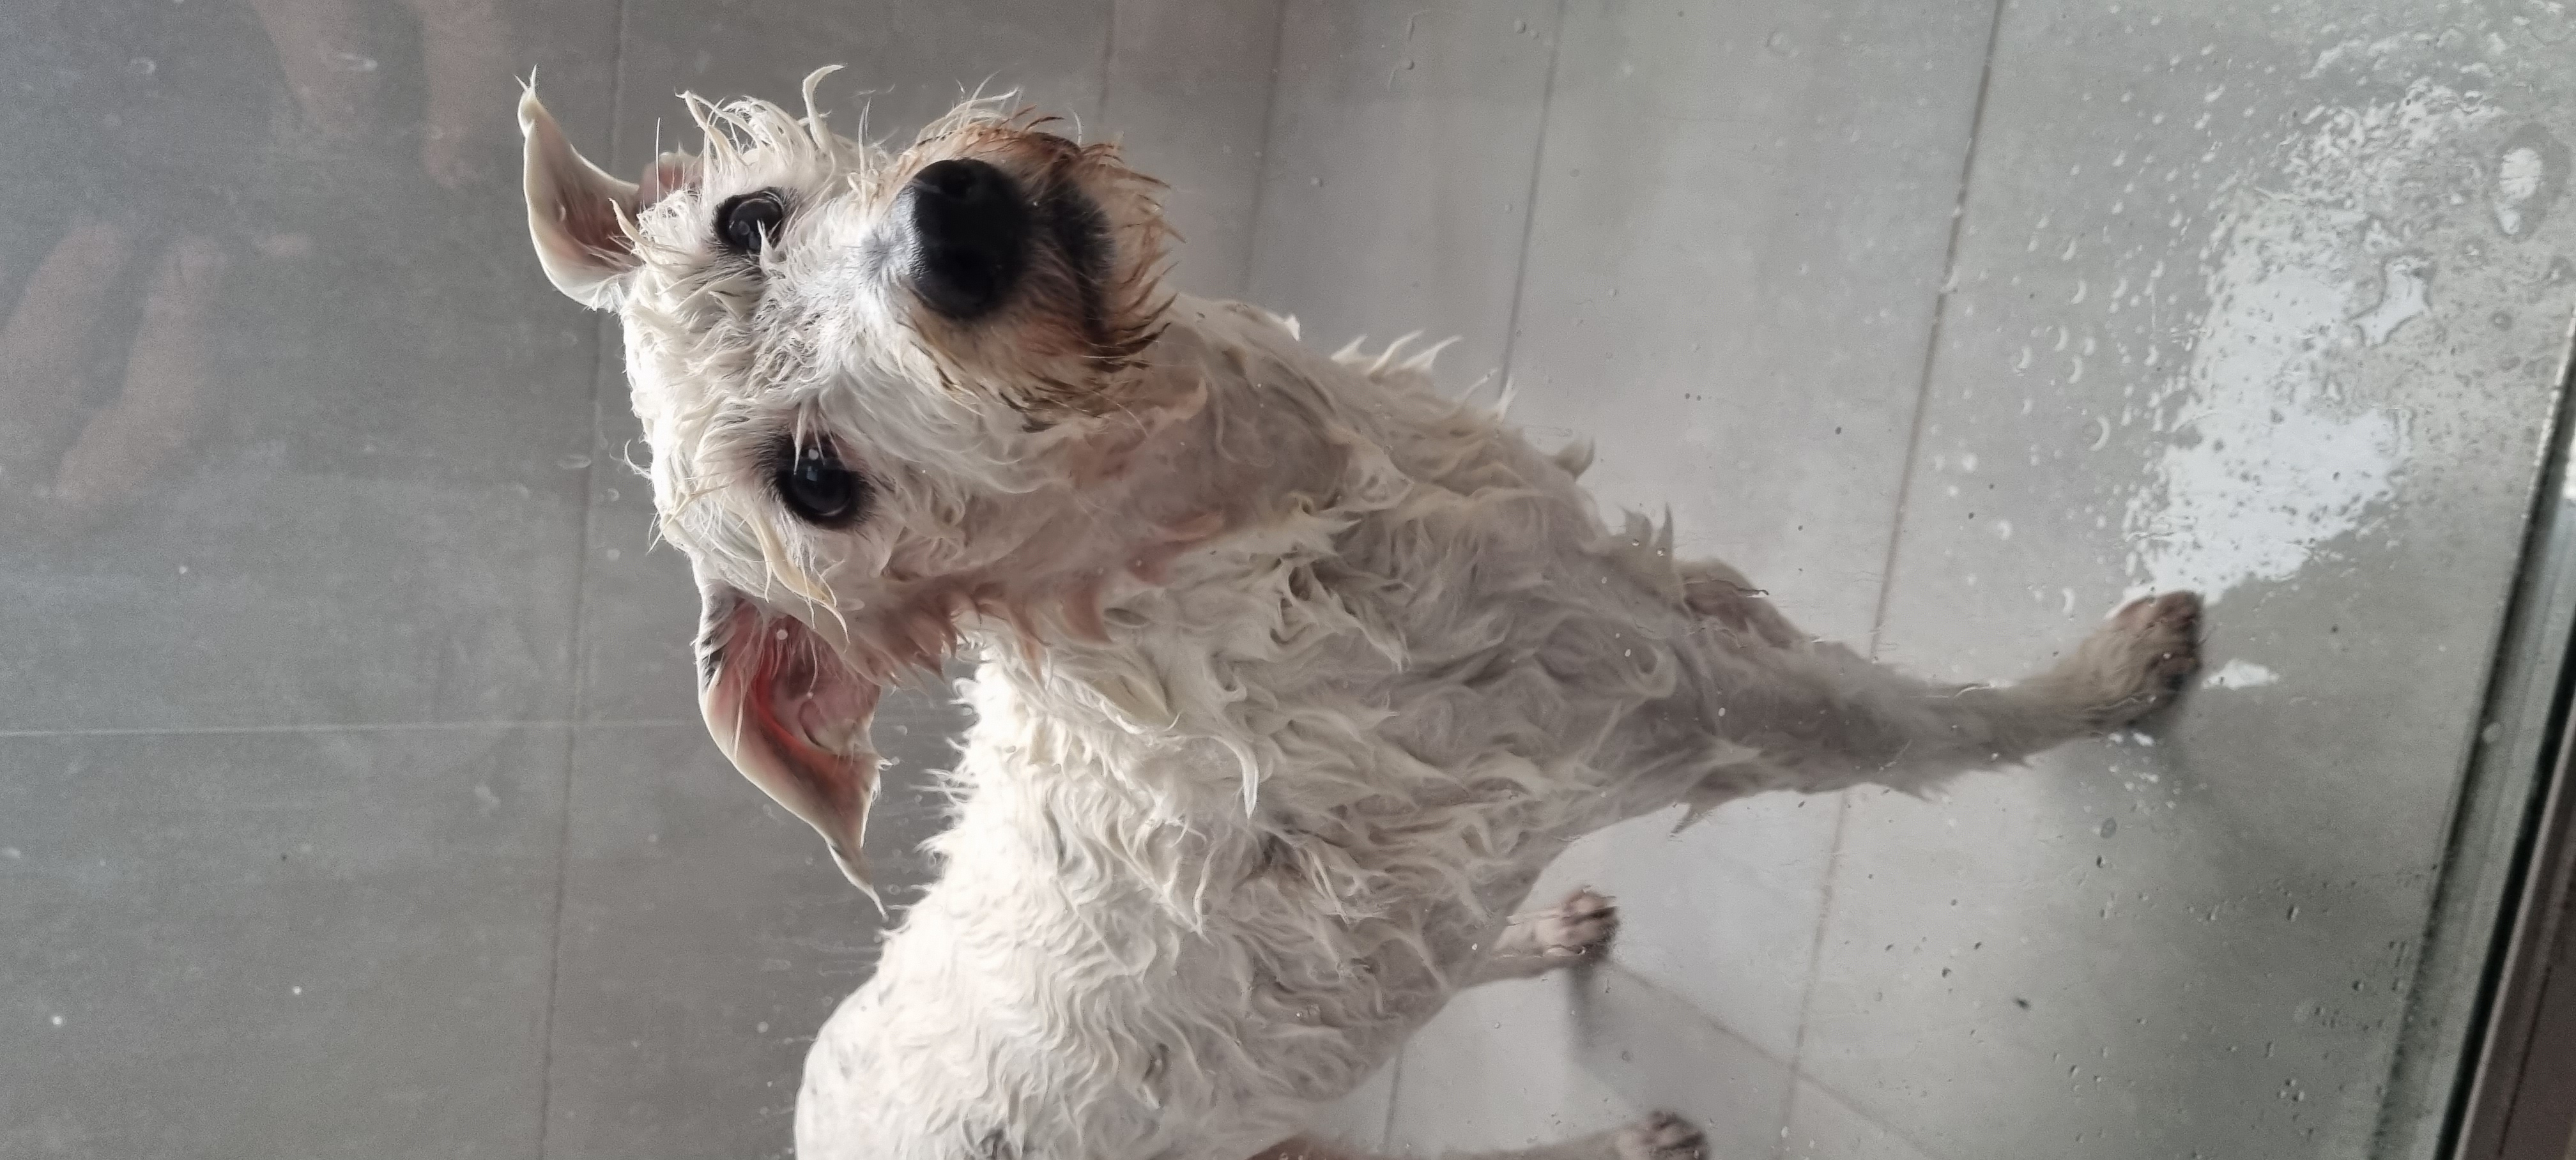 My dog Saki wet and soapy while getting a bath